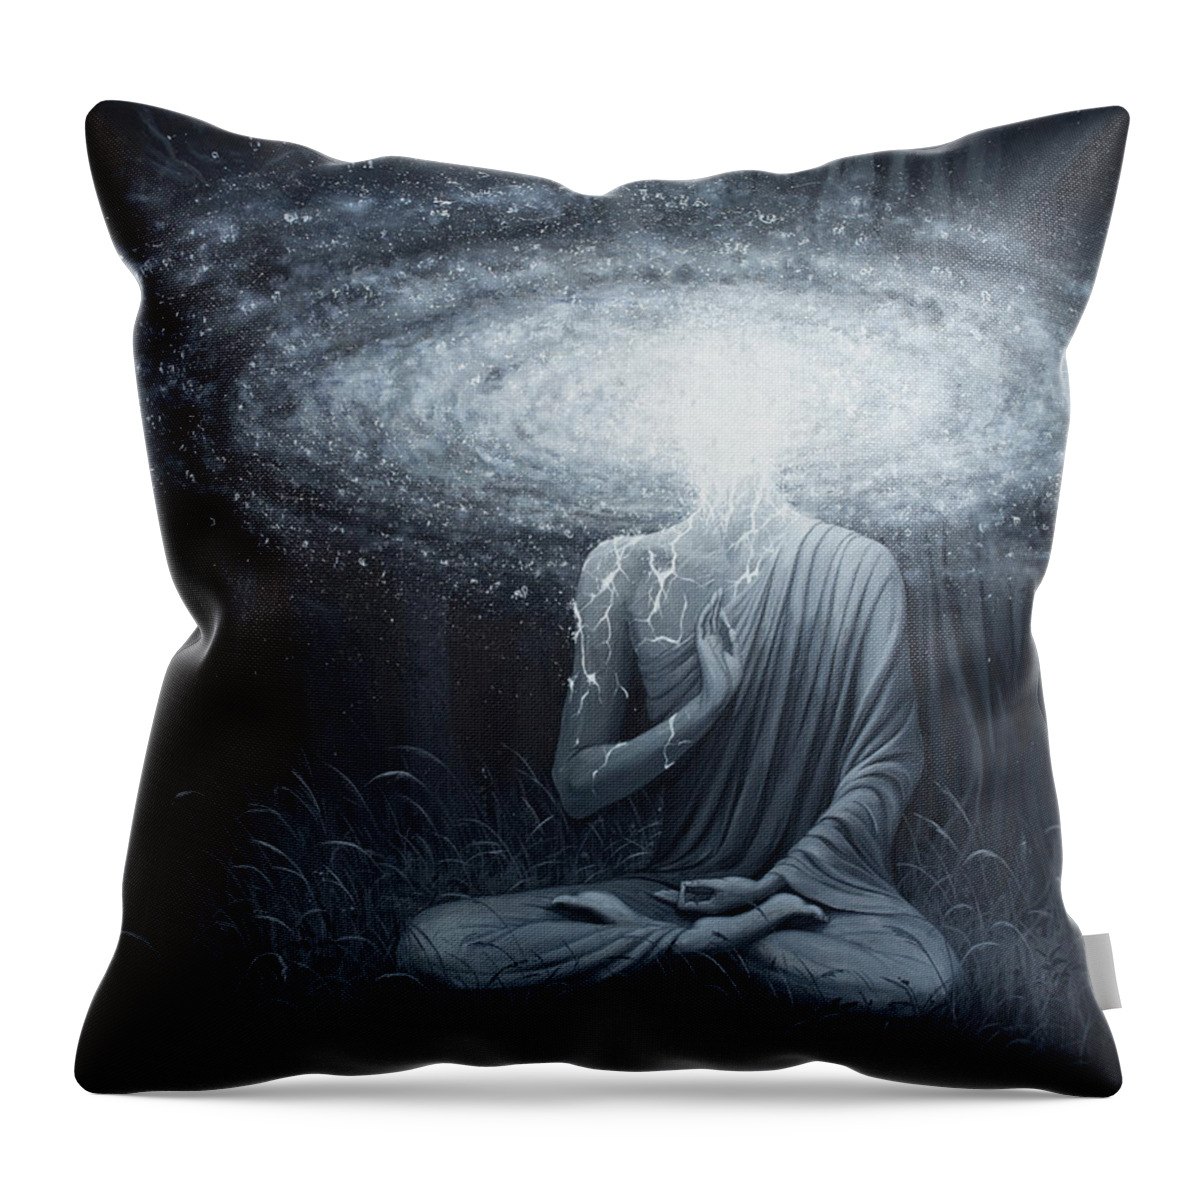 Awakening Throw Pillow featuring the painting Embracing The Present Moment by Adrian Borda